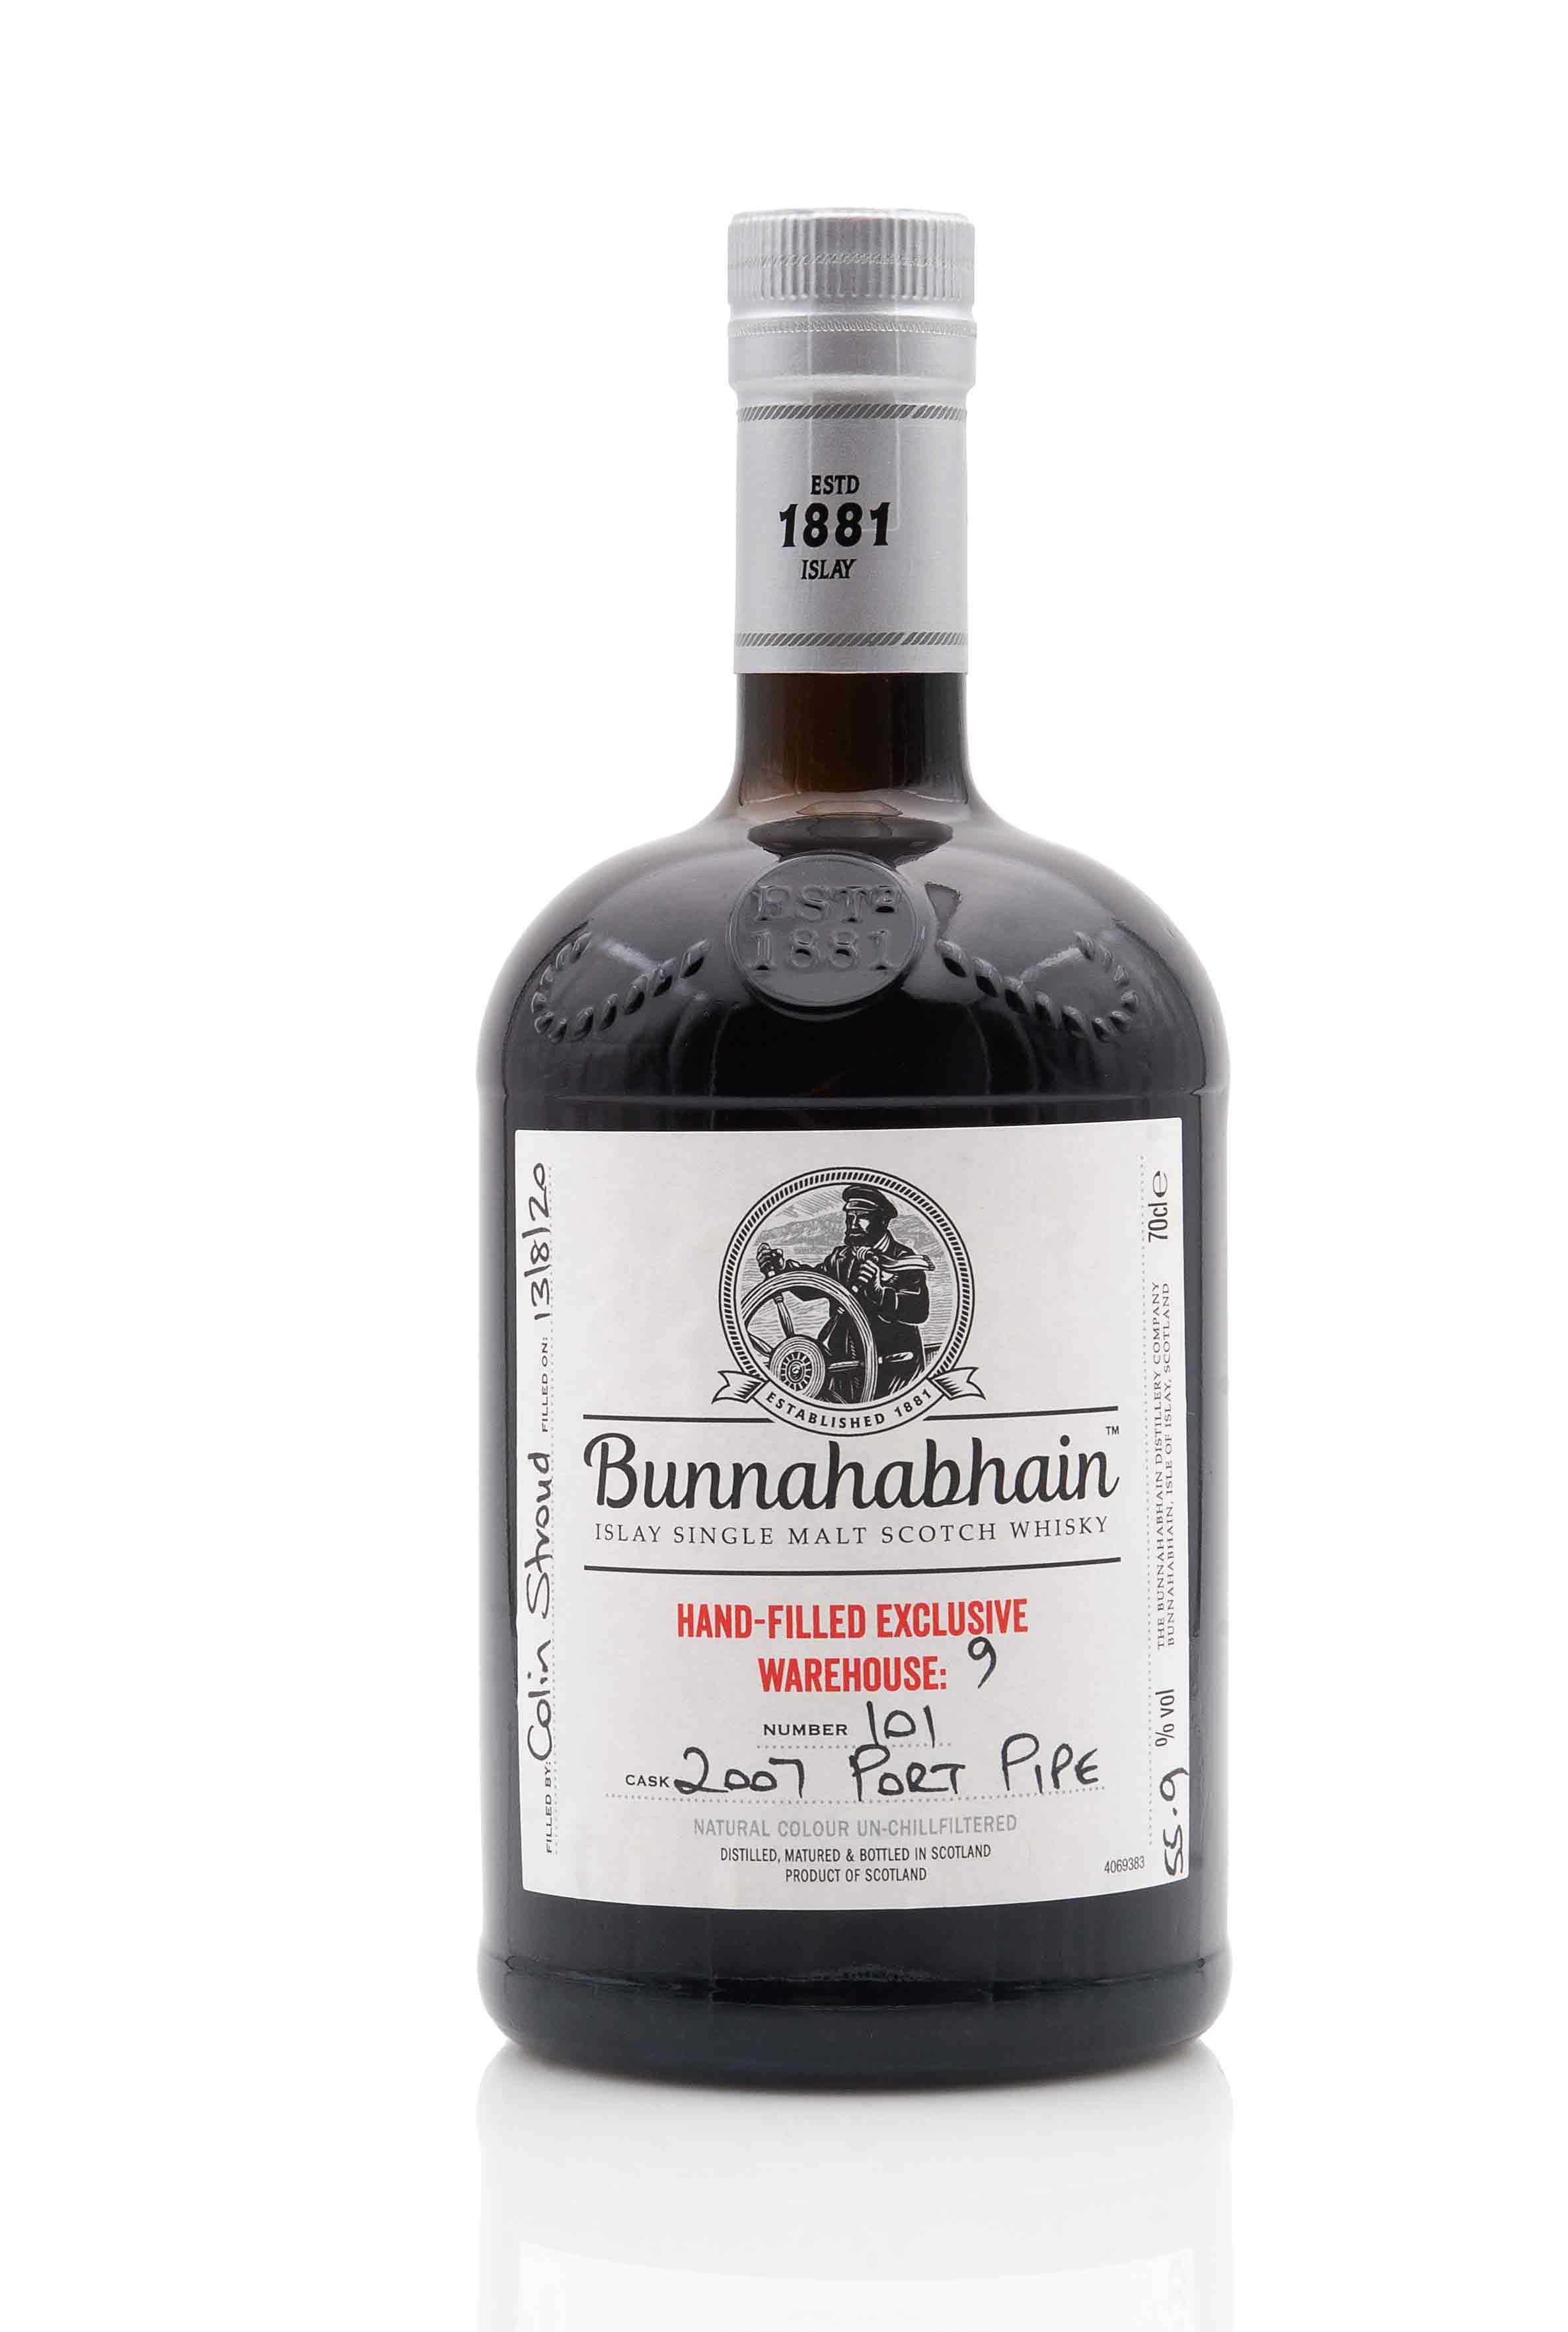 Bunnahabhain 2007 | Port Pipe Cask 101 | Hand-Filled Exclusive | Abbey Whisky